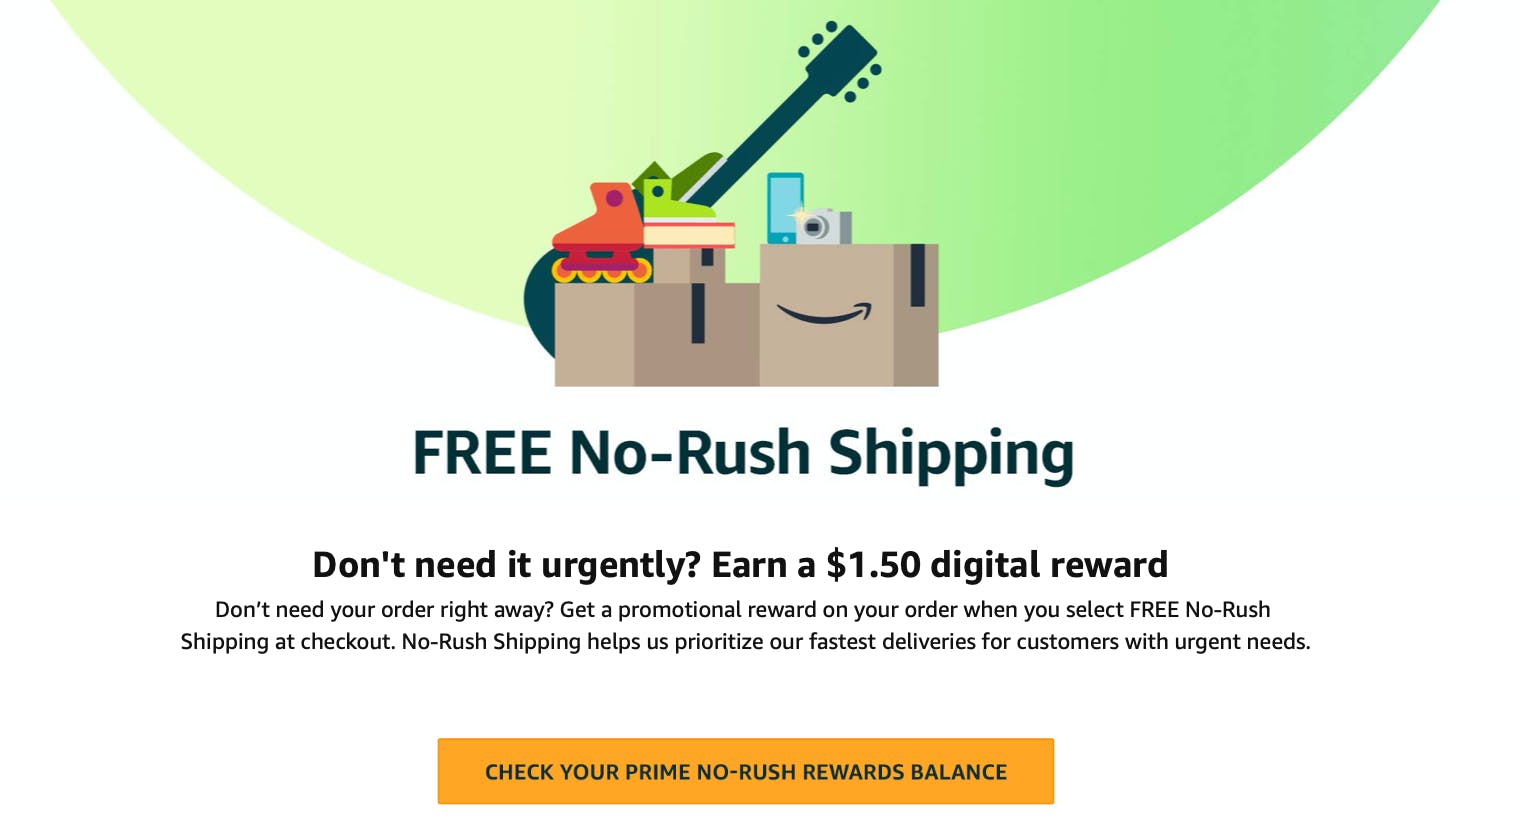 an Amazon ad promoting free no-rush shipping with a $1.50 digital reward